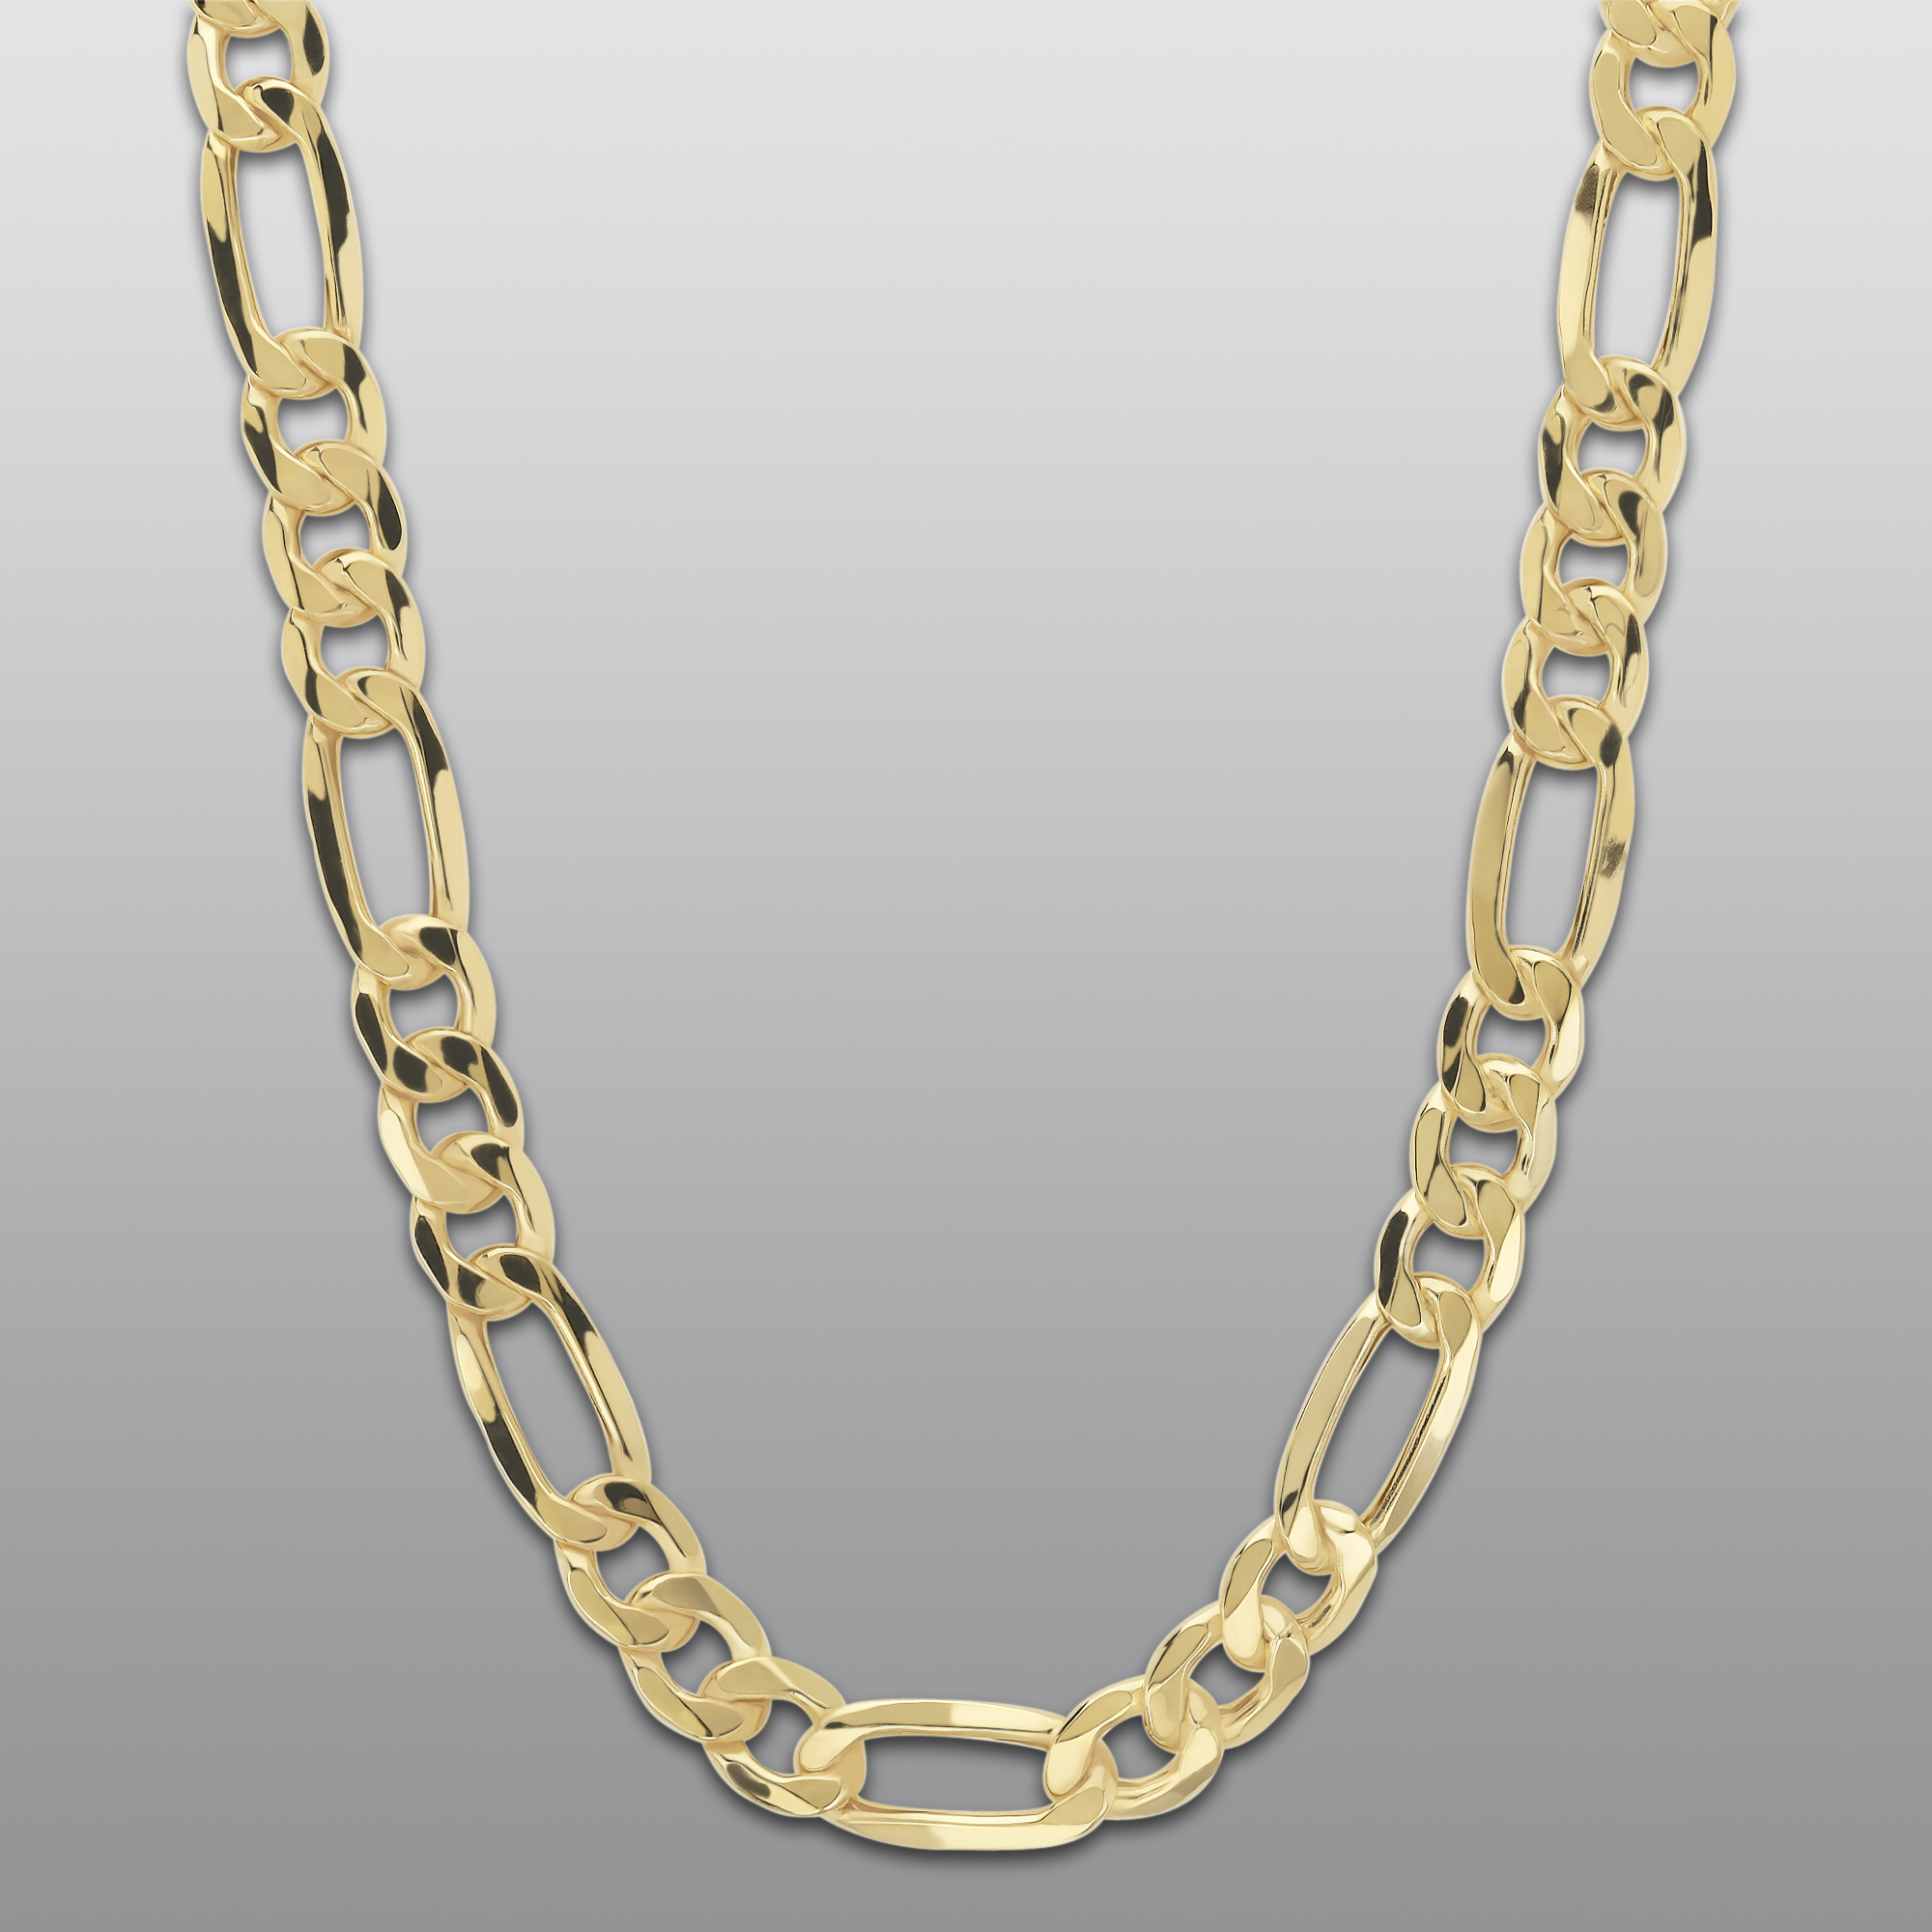 True Gold 10KY NECKLACE FIGARO22IN 7247707